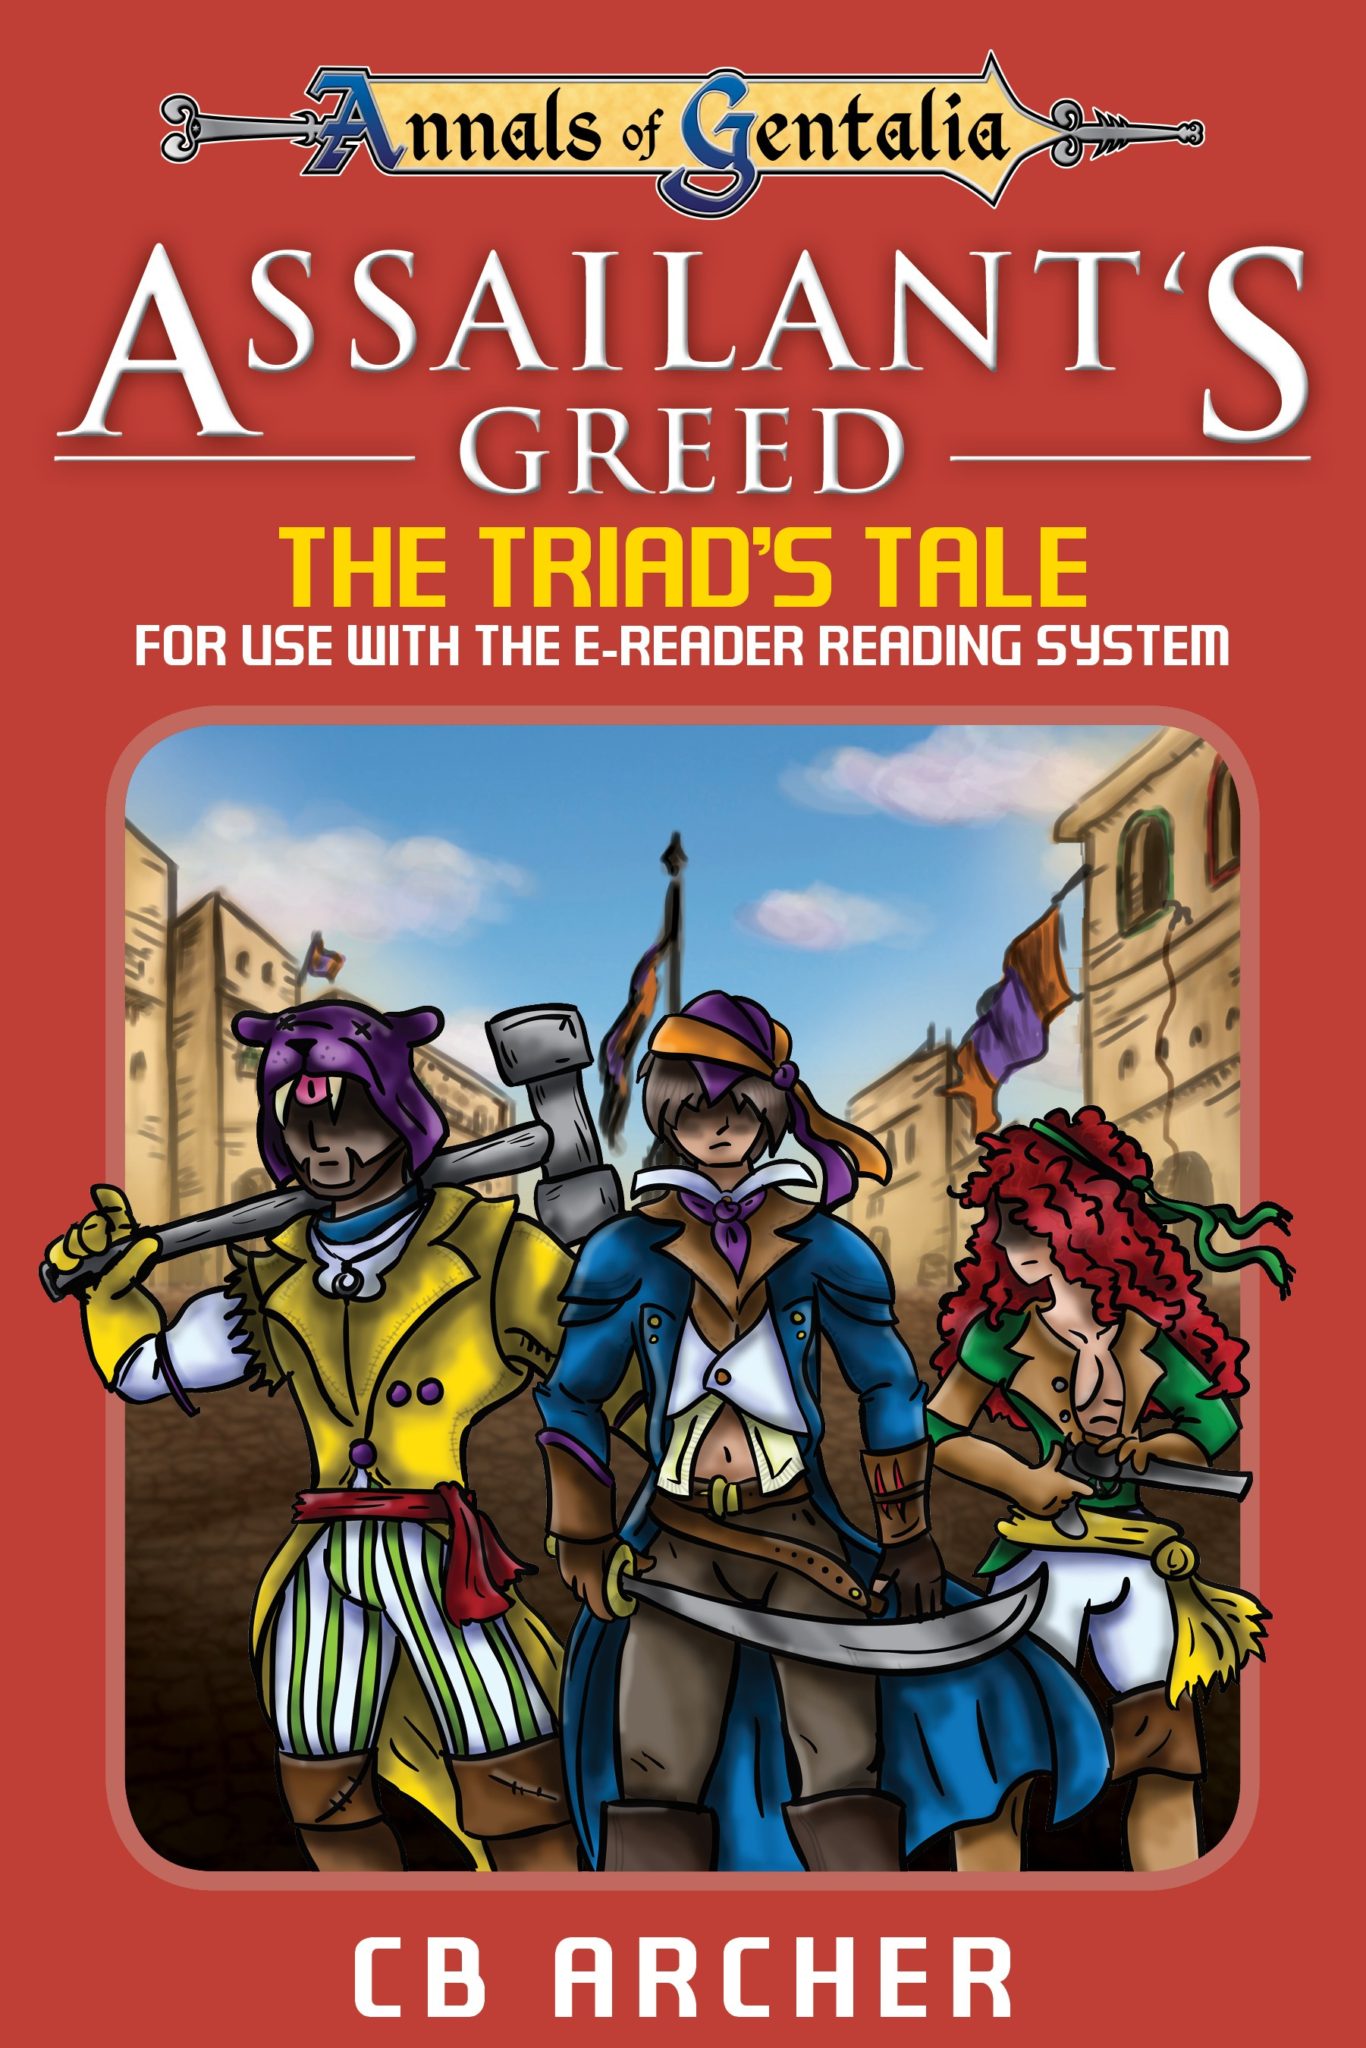 FREE: Assailant’s Greed: The Triad’s Tale by CB Archer